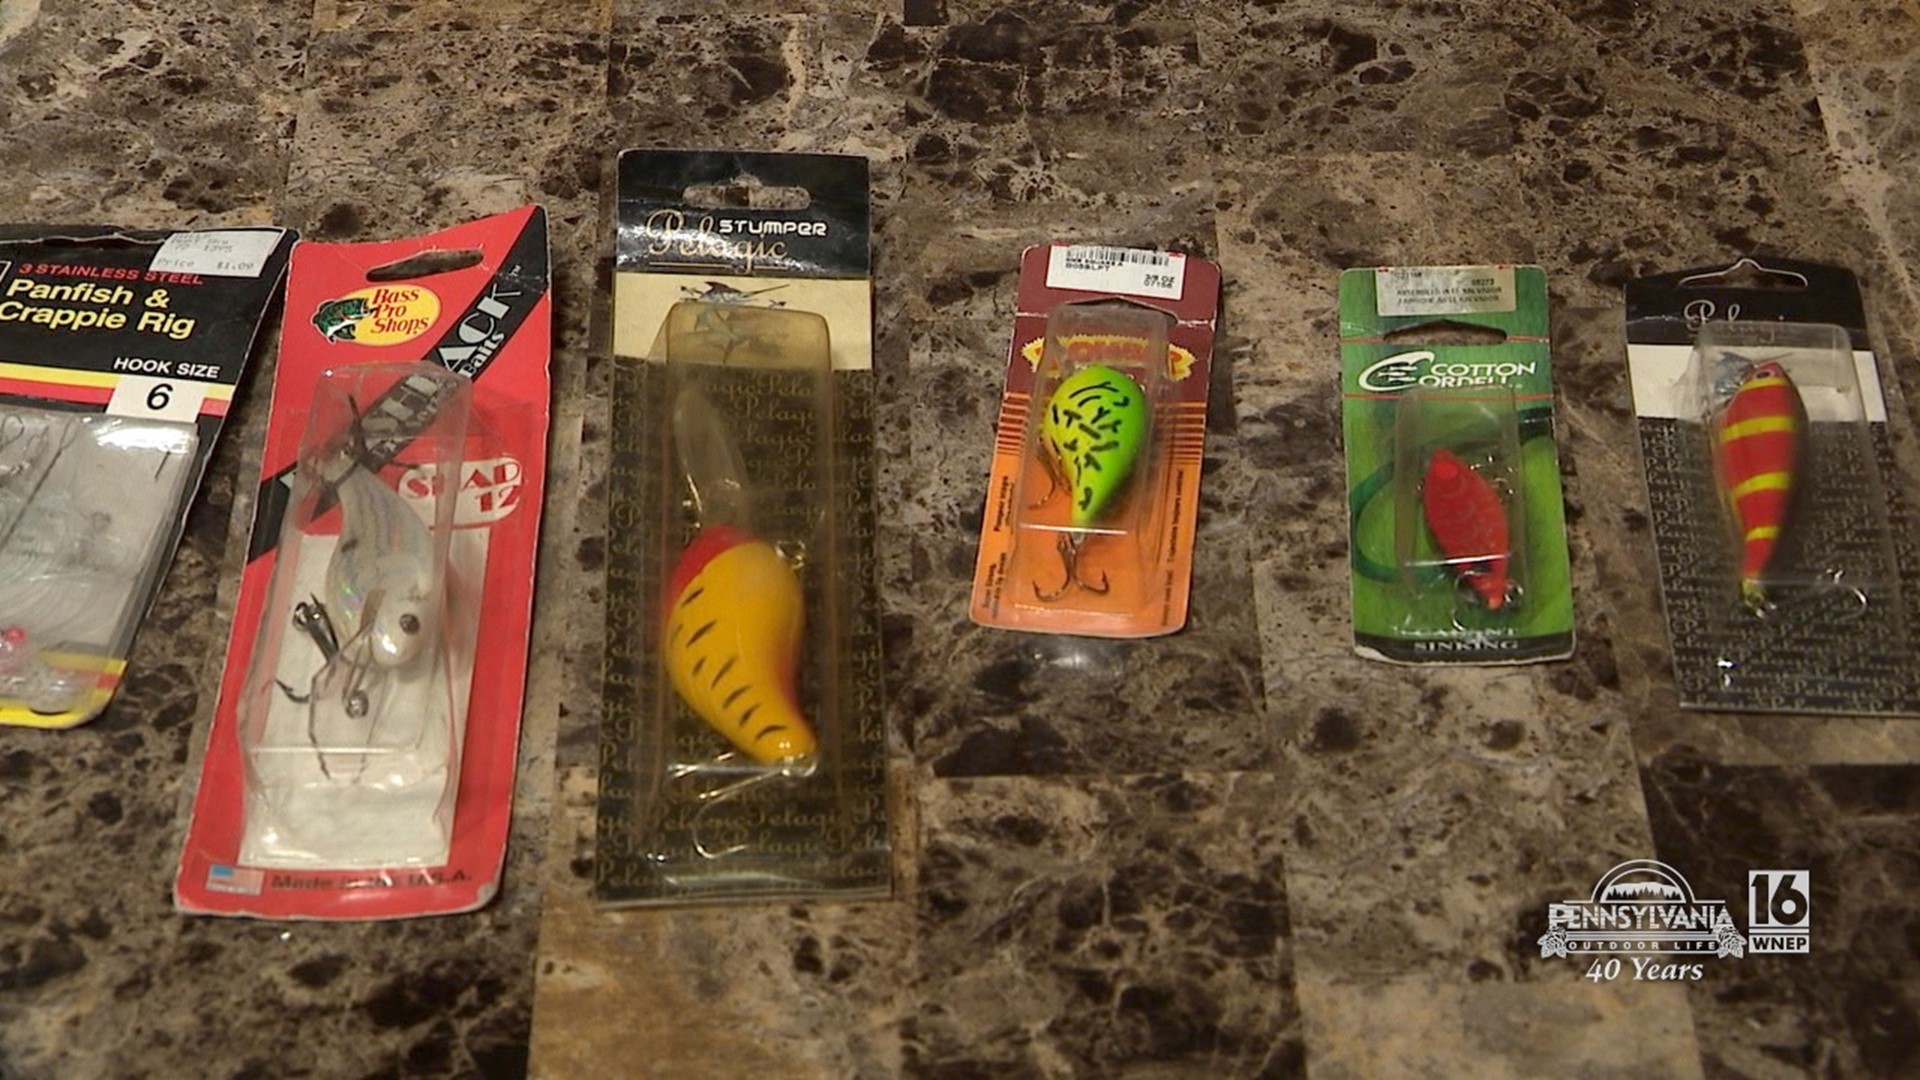 Fishing lures that would be great stocking stuffers this Christmas.